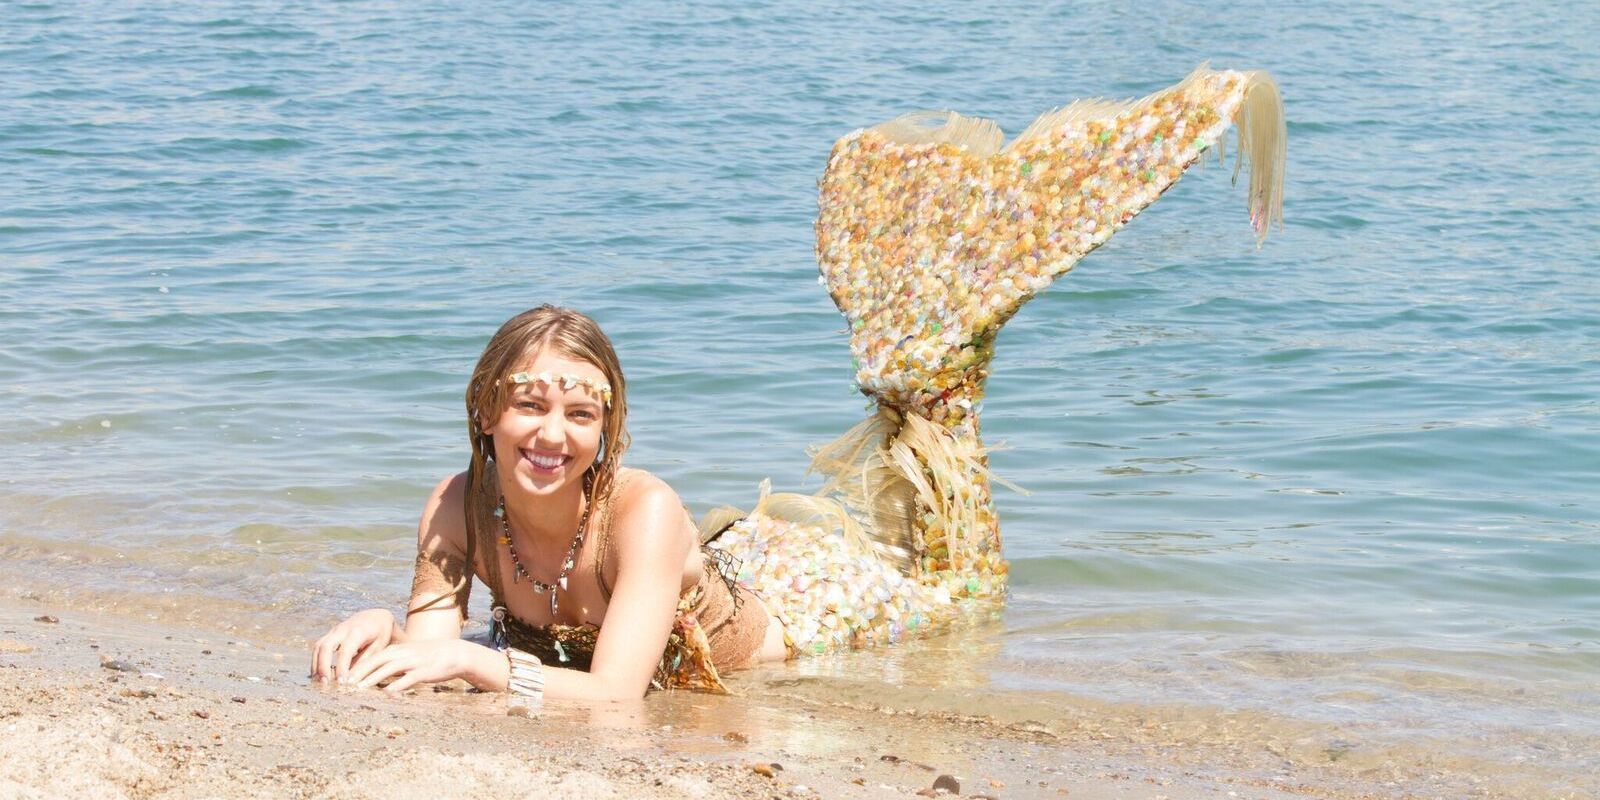 10 Magical Movies & TV Shows About Mermaids